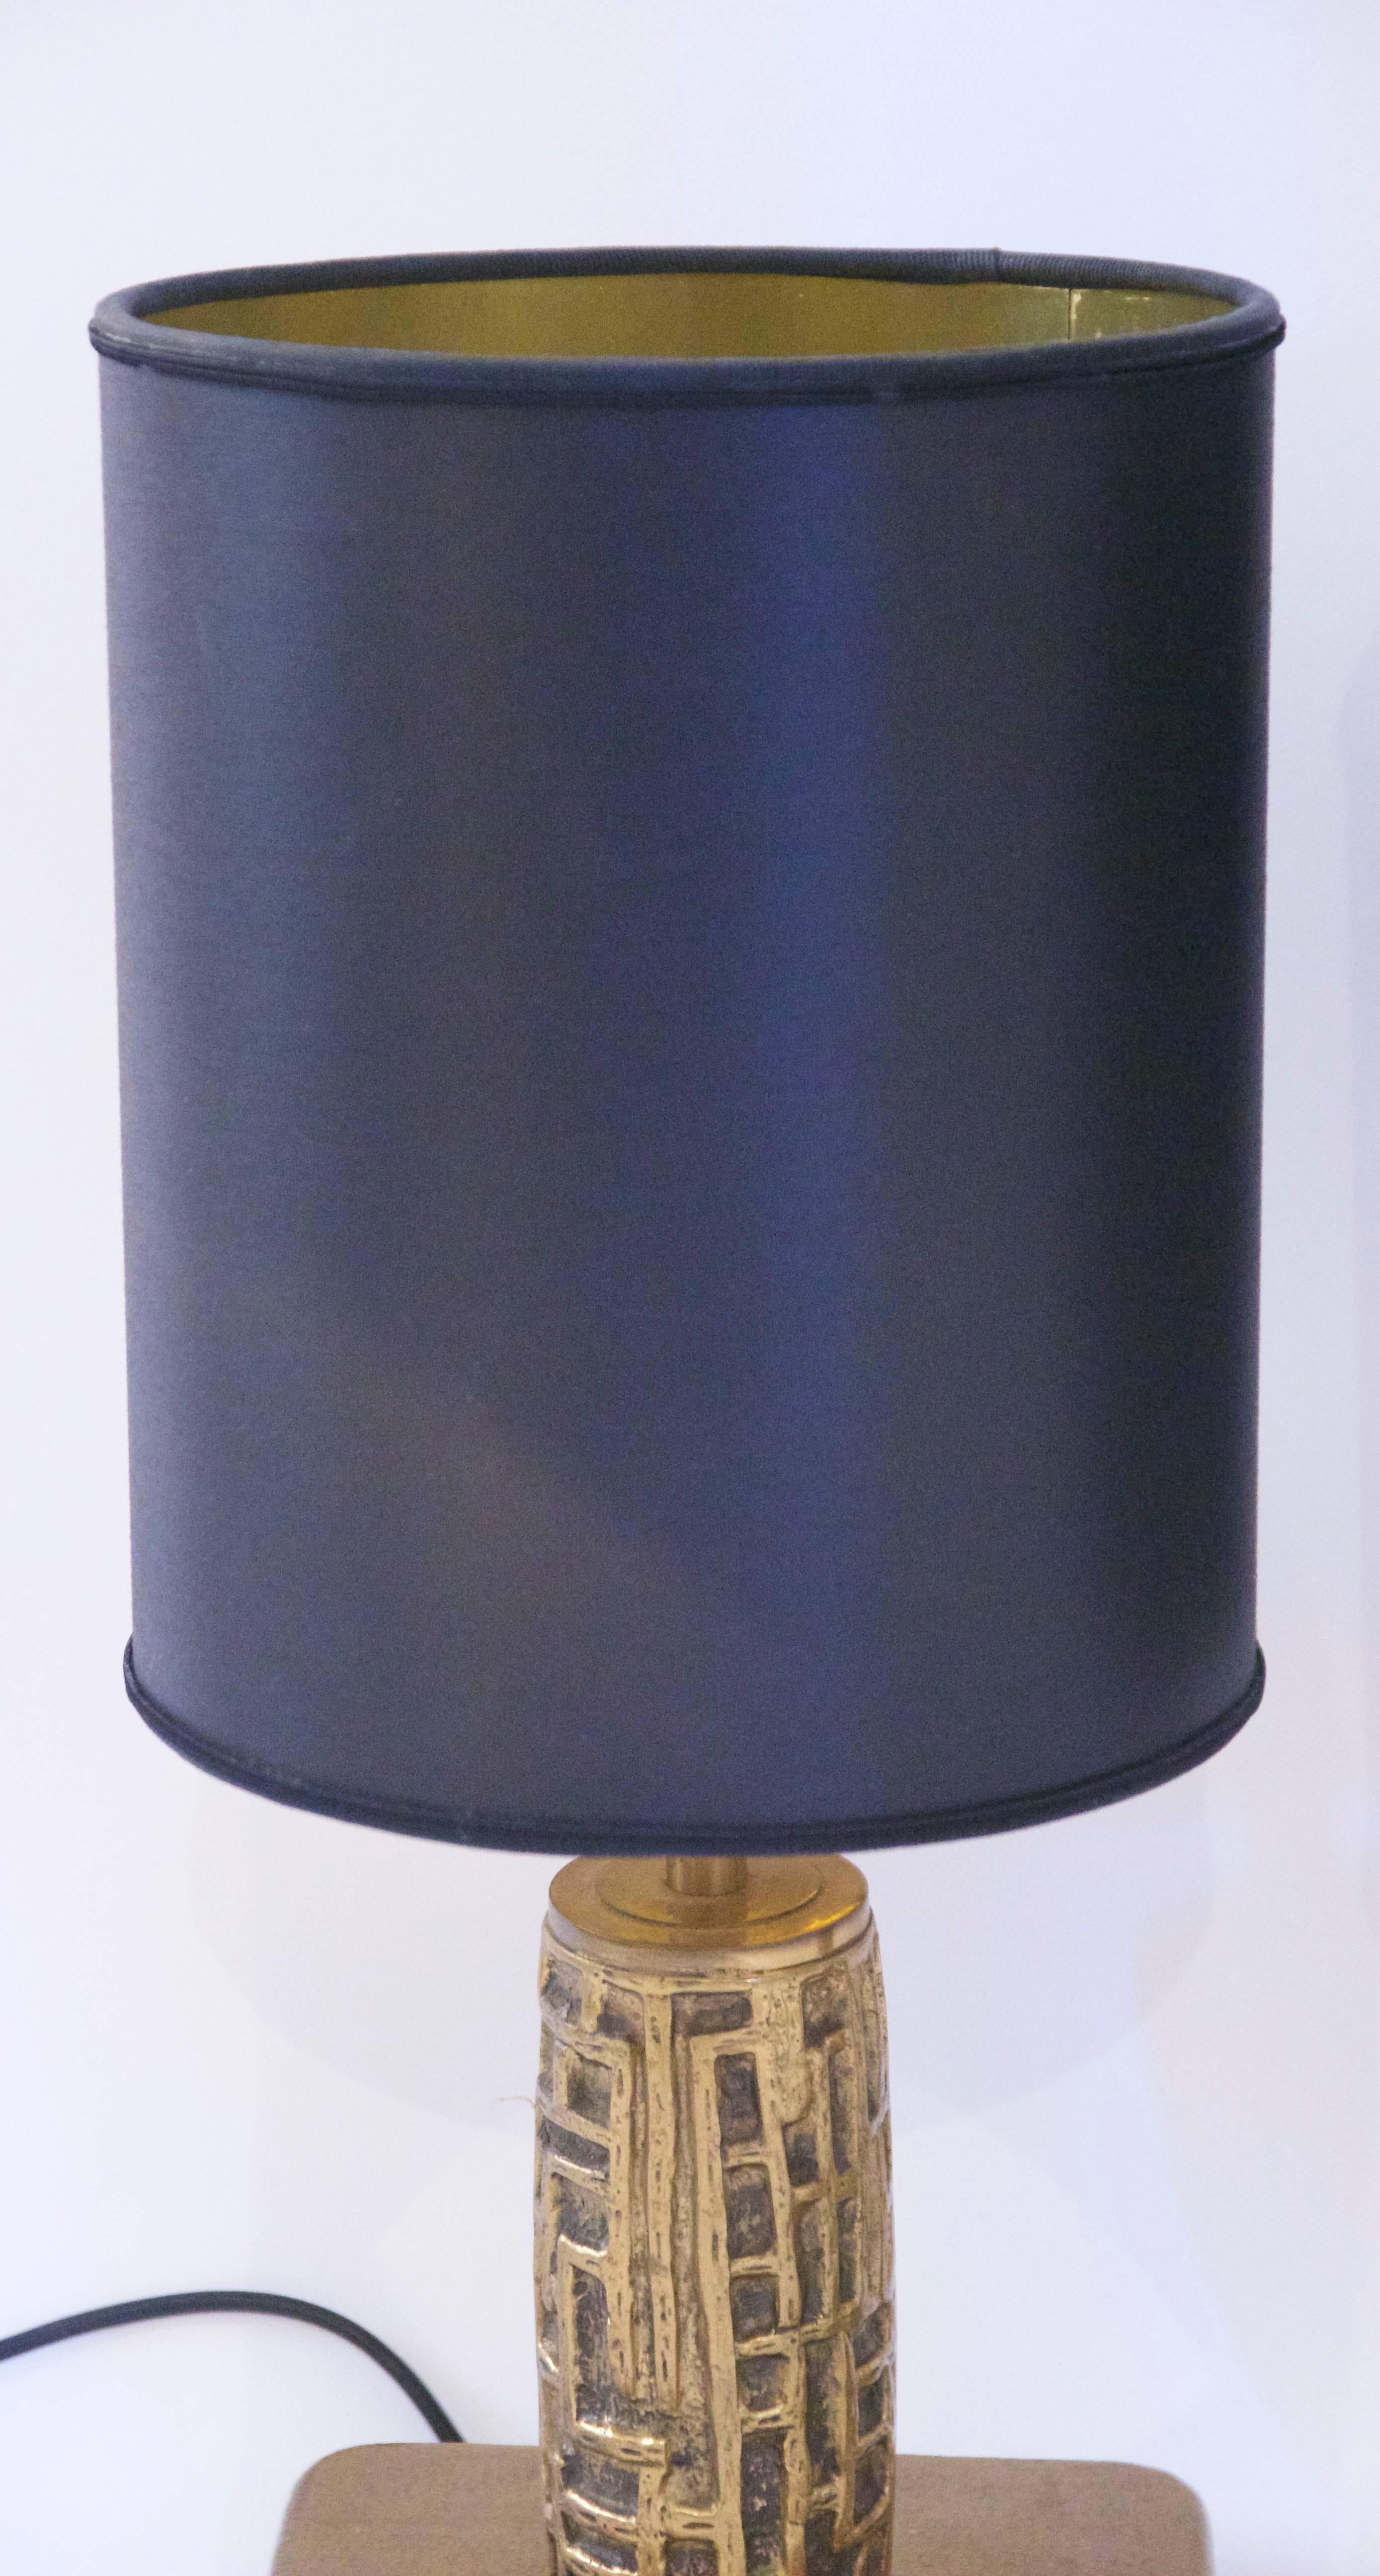 Luciano Frigerio, pair of table lamps, 
bronze, Frigerio di Desio production,
signed under the base,
circa 1970, Italy.
Measures: Height 46 cm, diameter 21 cm.
 